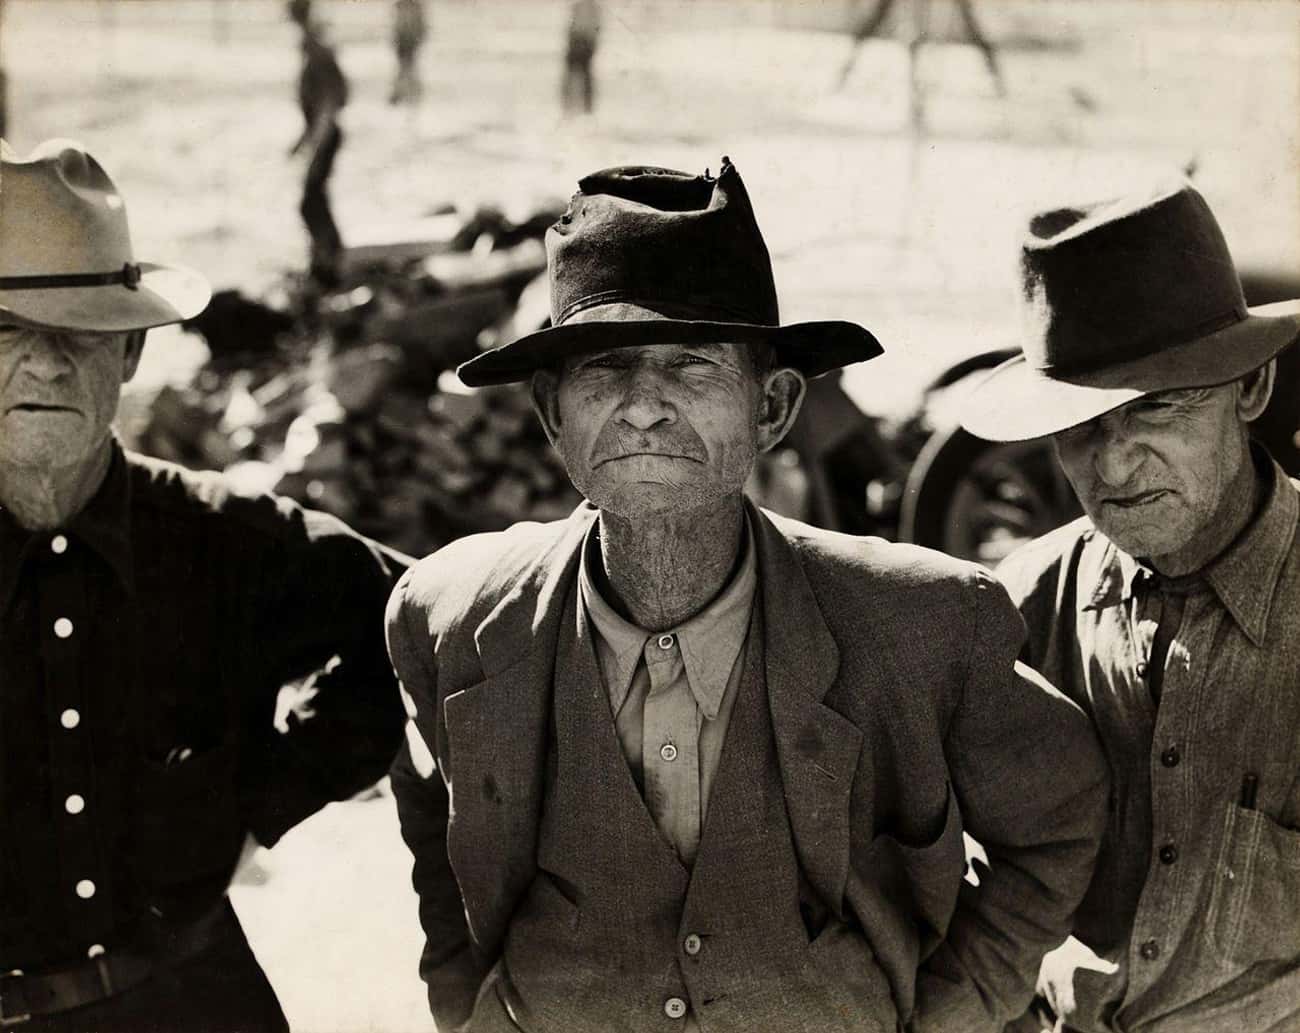 Unemployed Tenant Farmer In Imperial Valley, CA, 1937